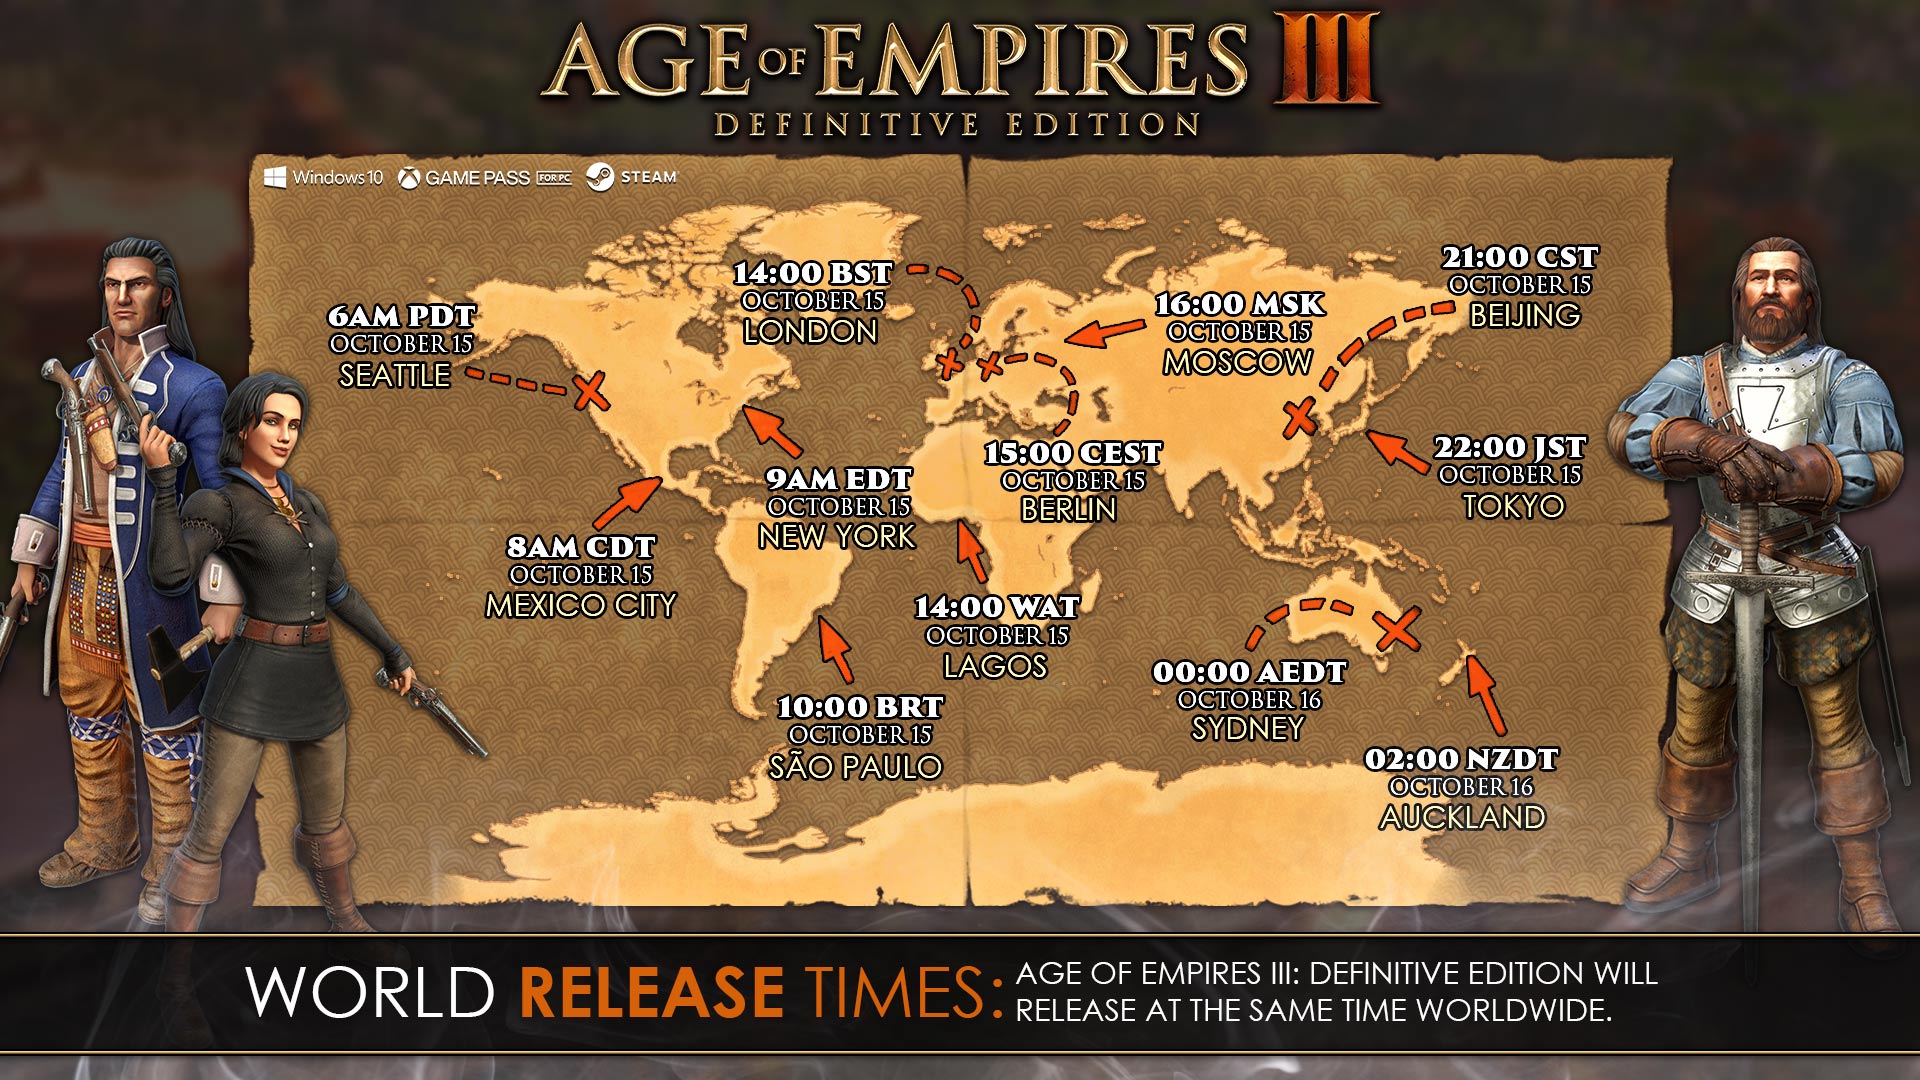 age of empires definitive edition can